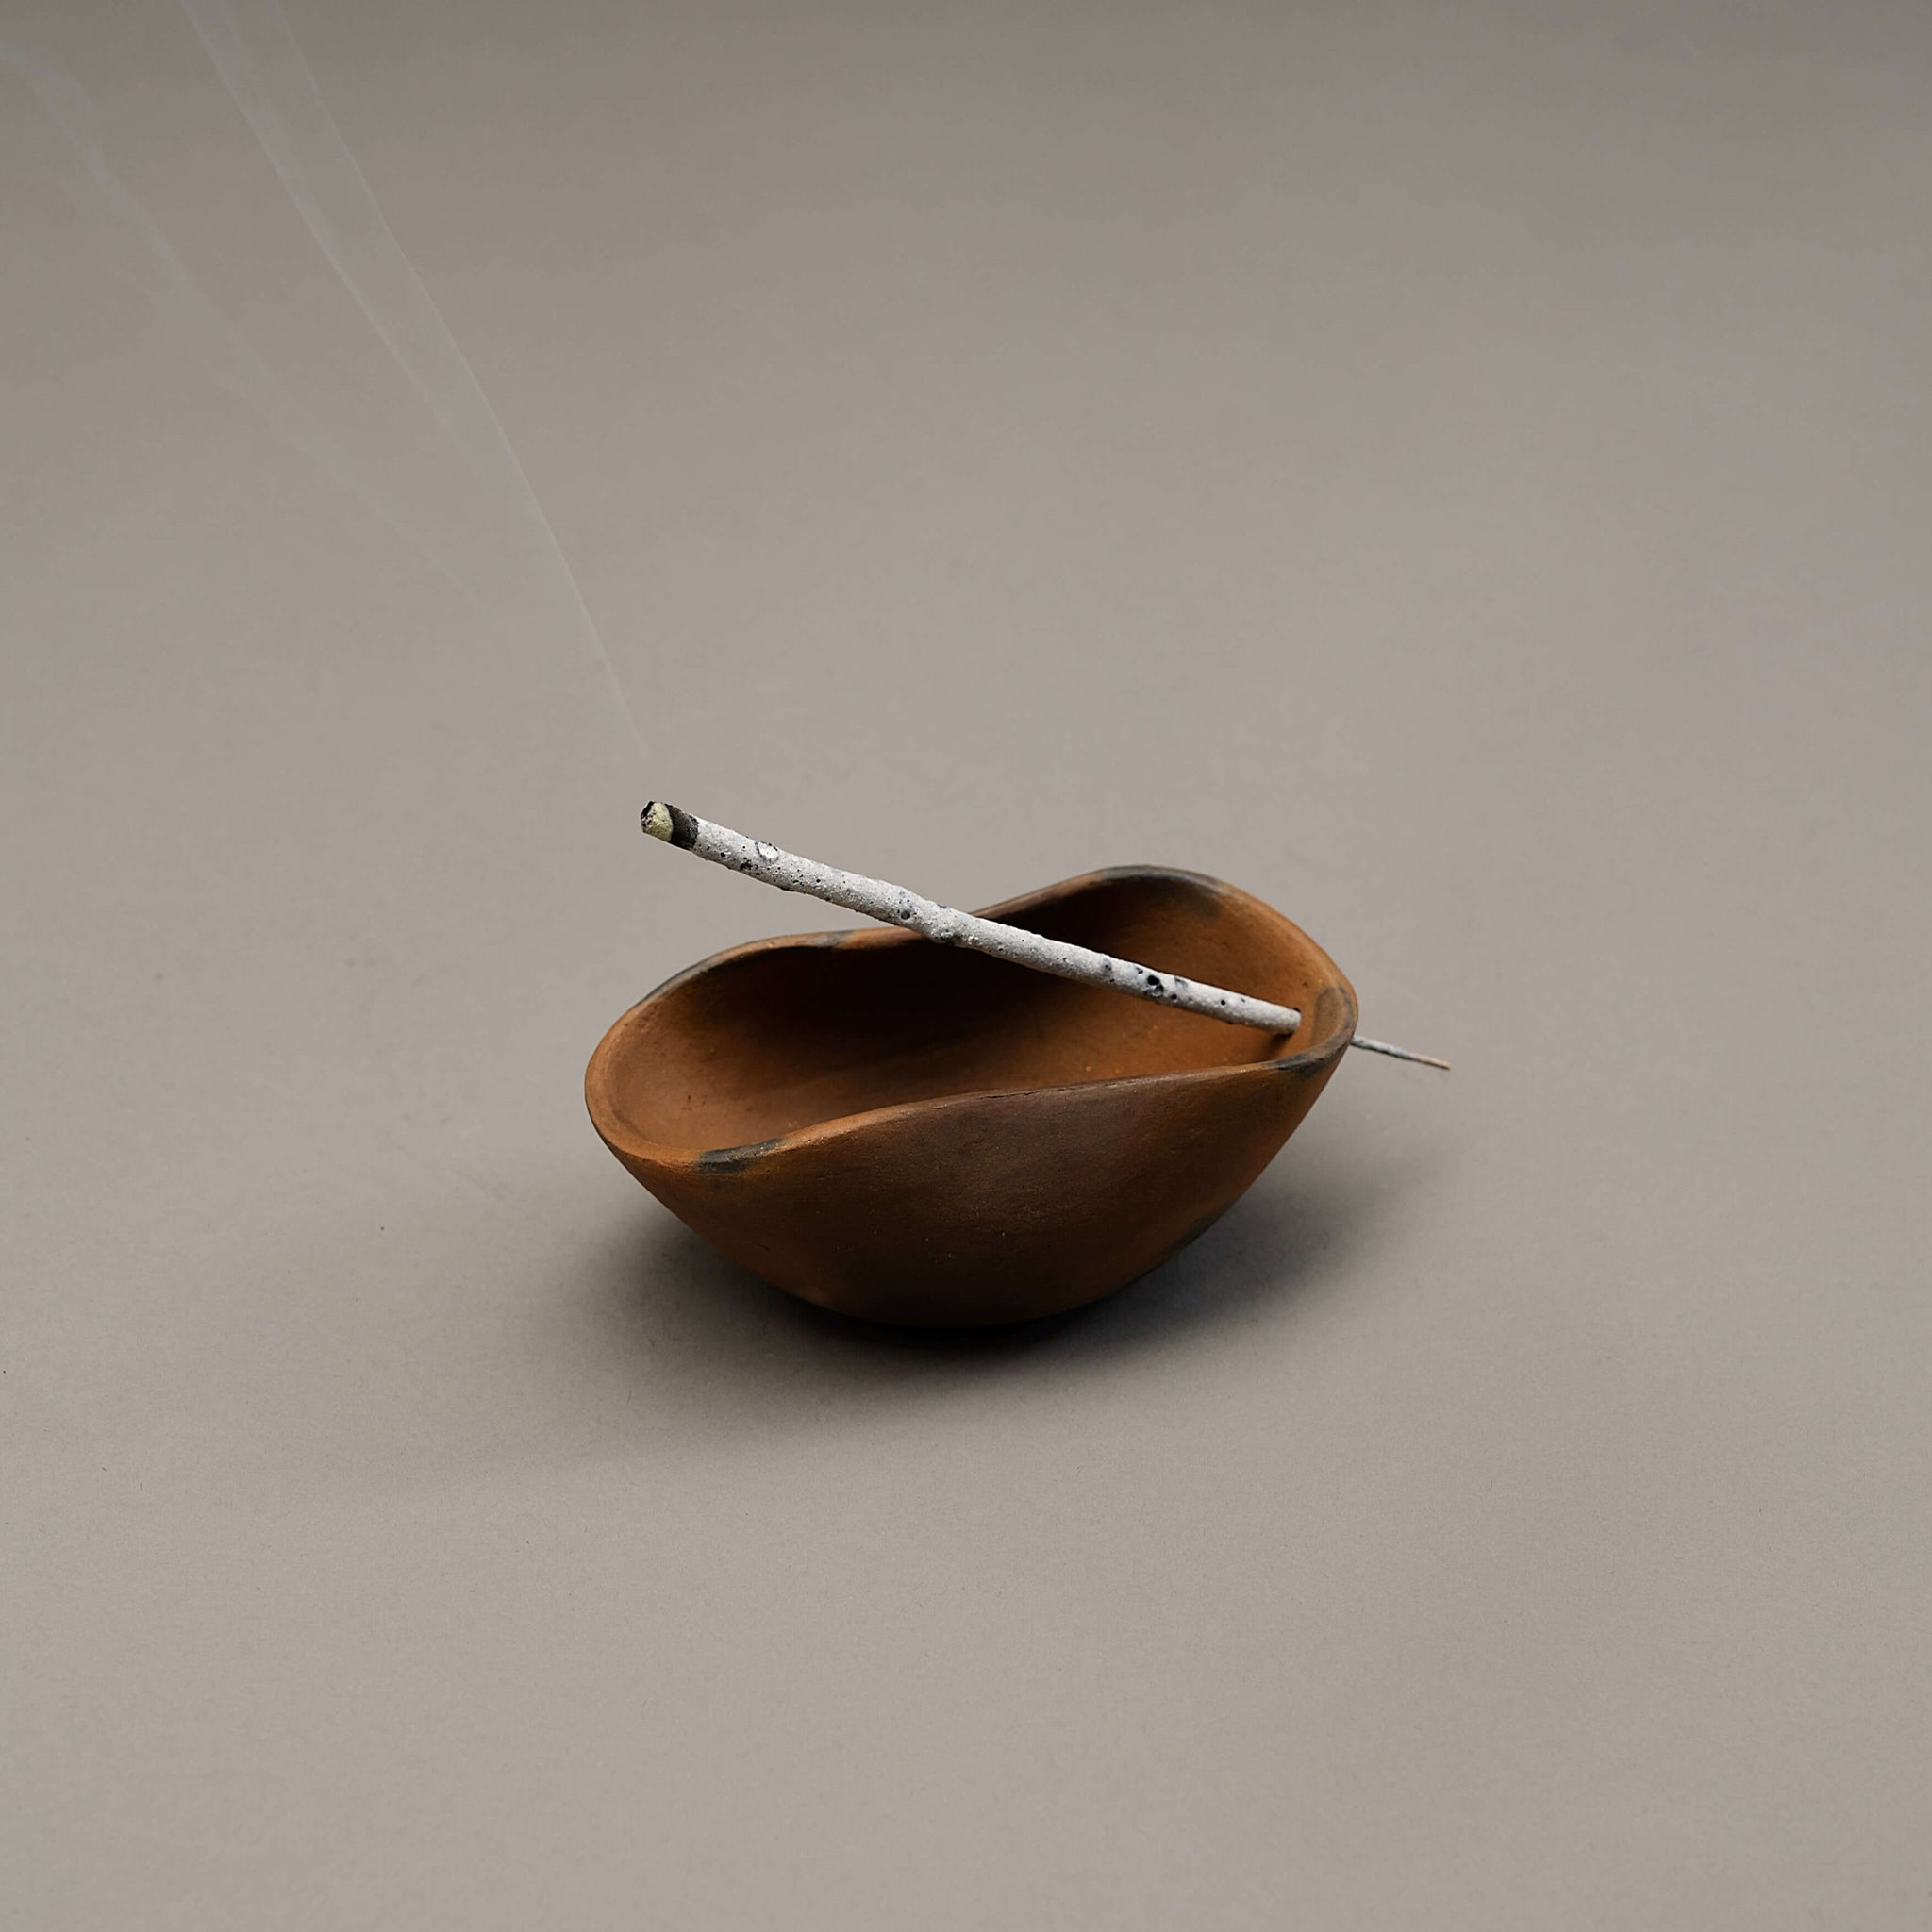 A sculptural incense holder with a copal incense stick.